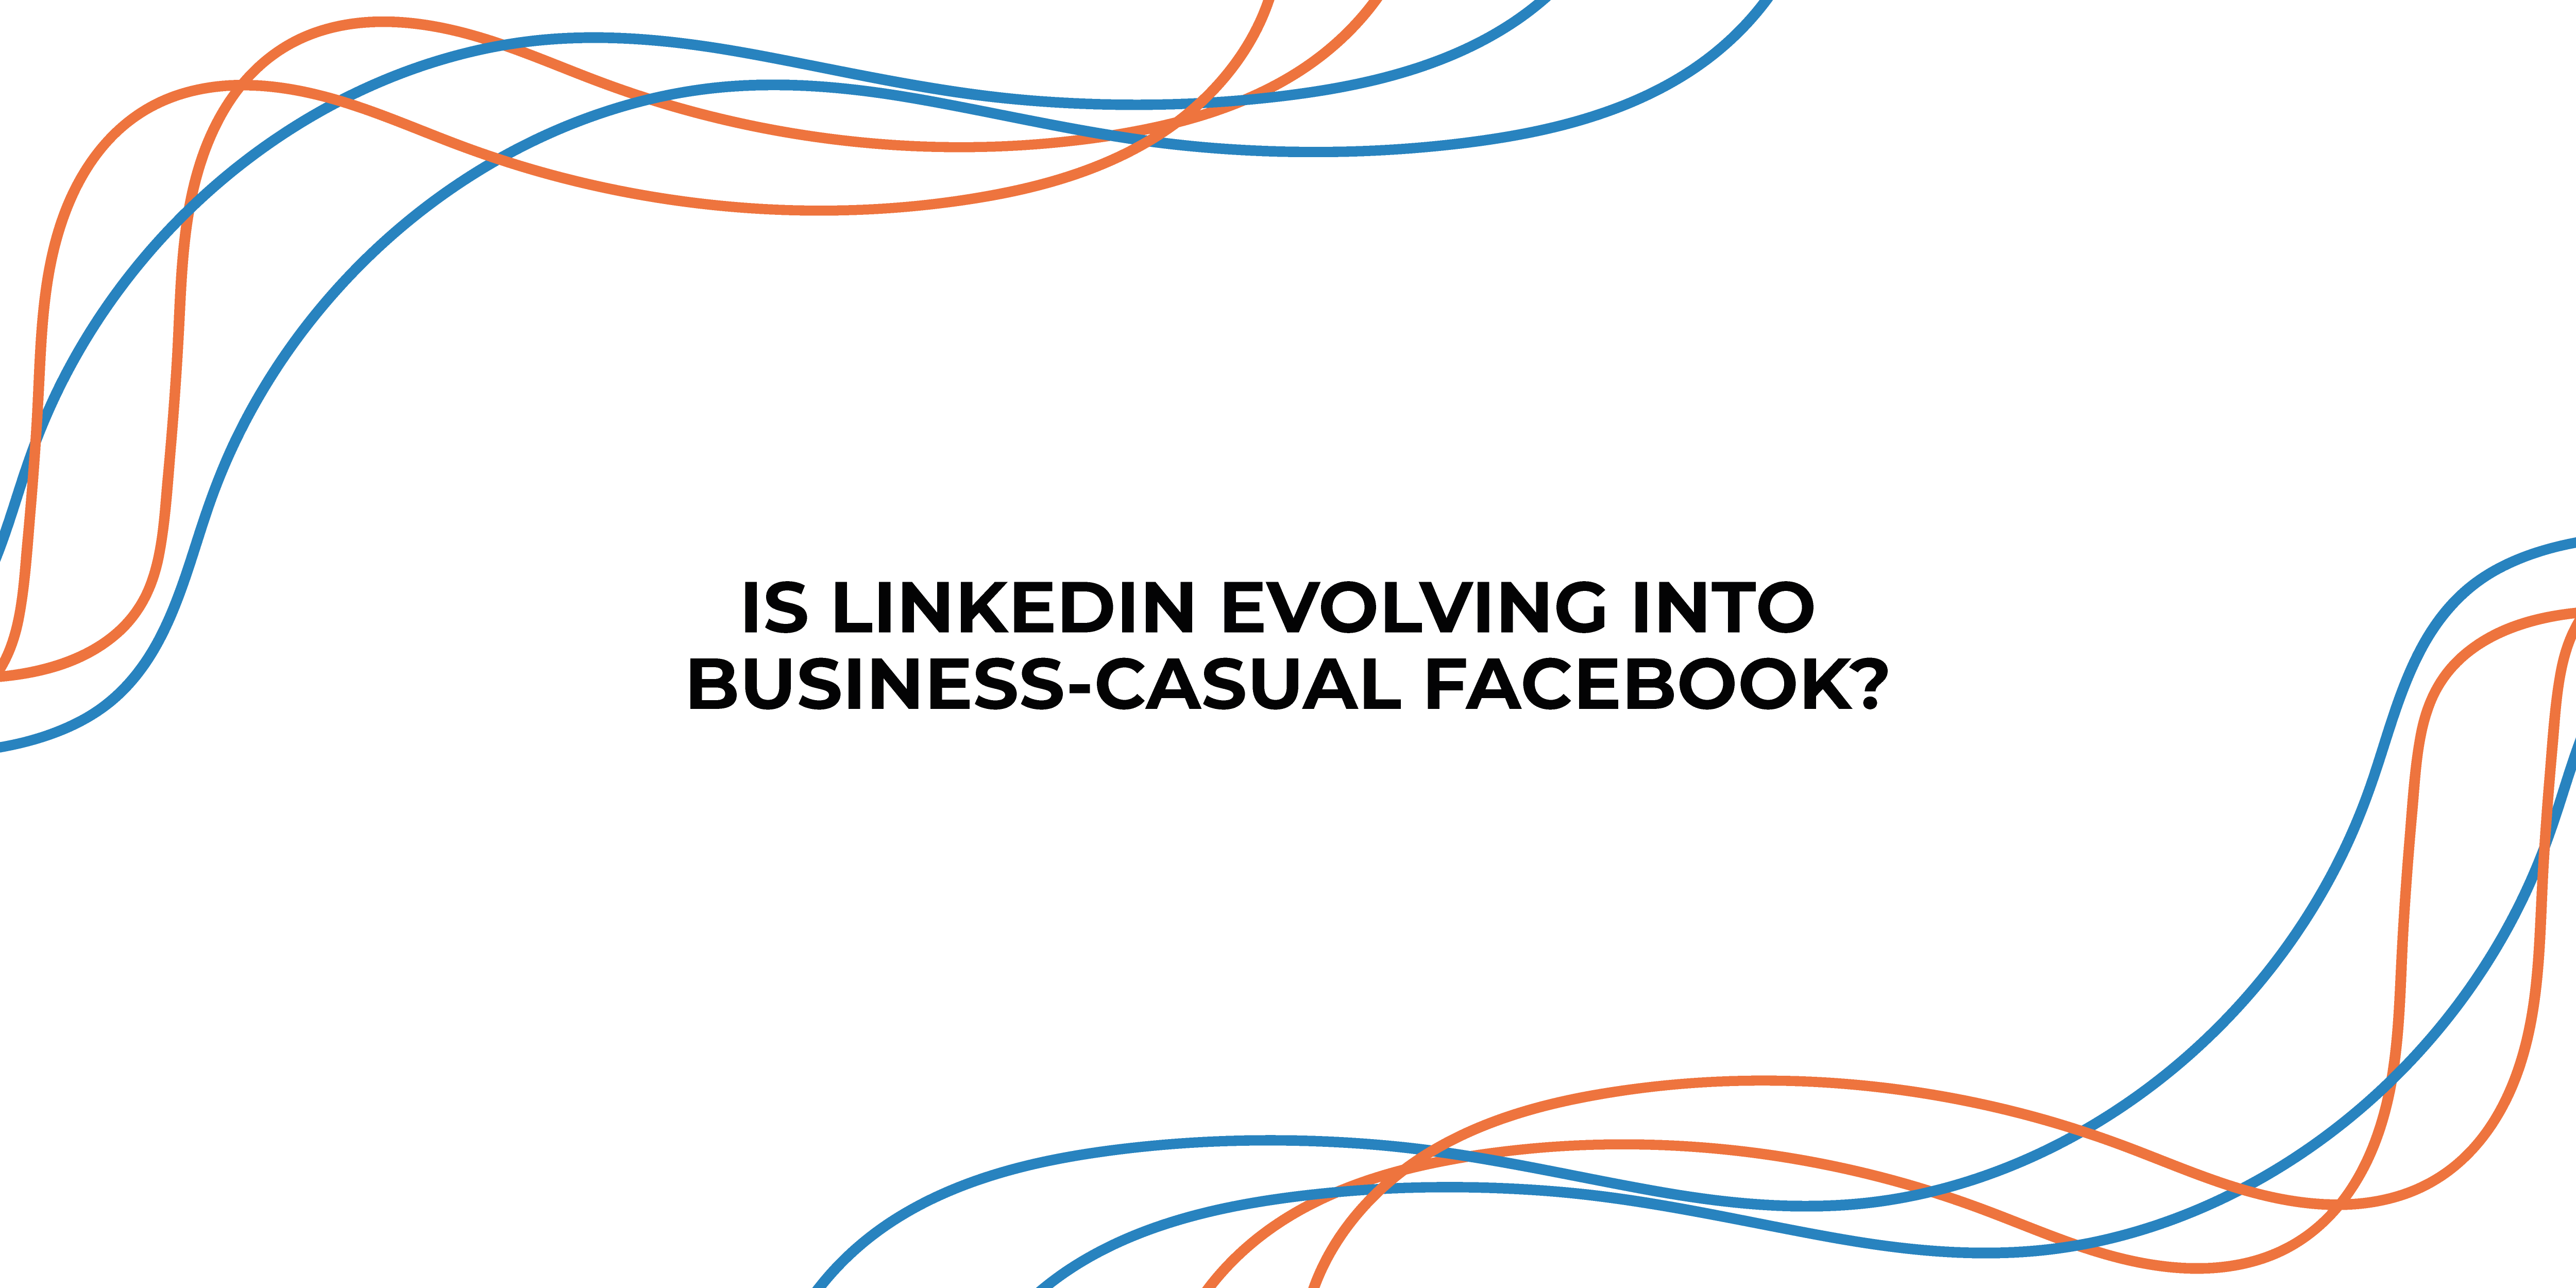 Is LinkedIn Evolving into Business-Casual Facebook?